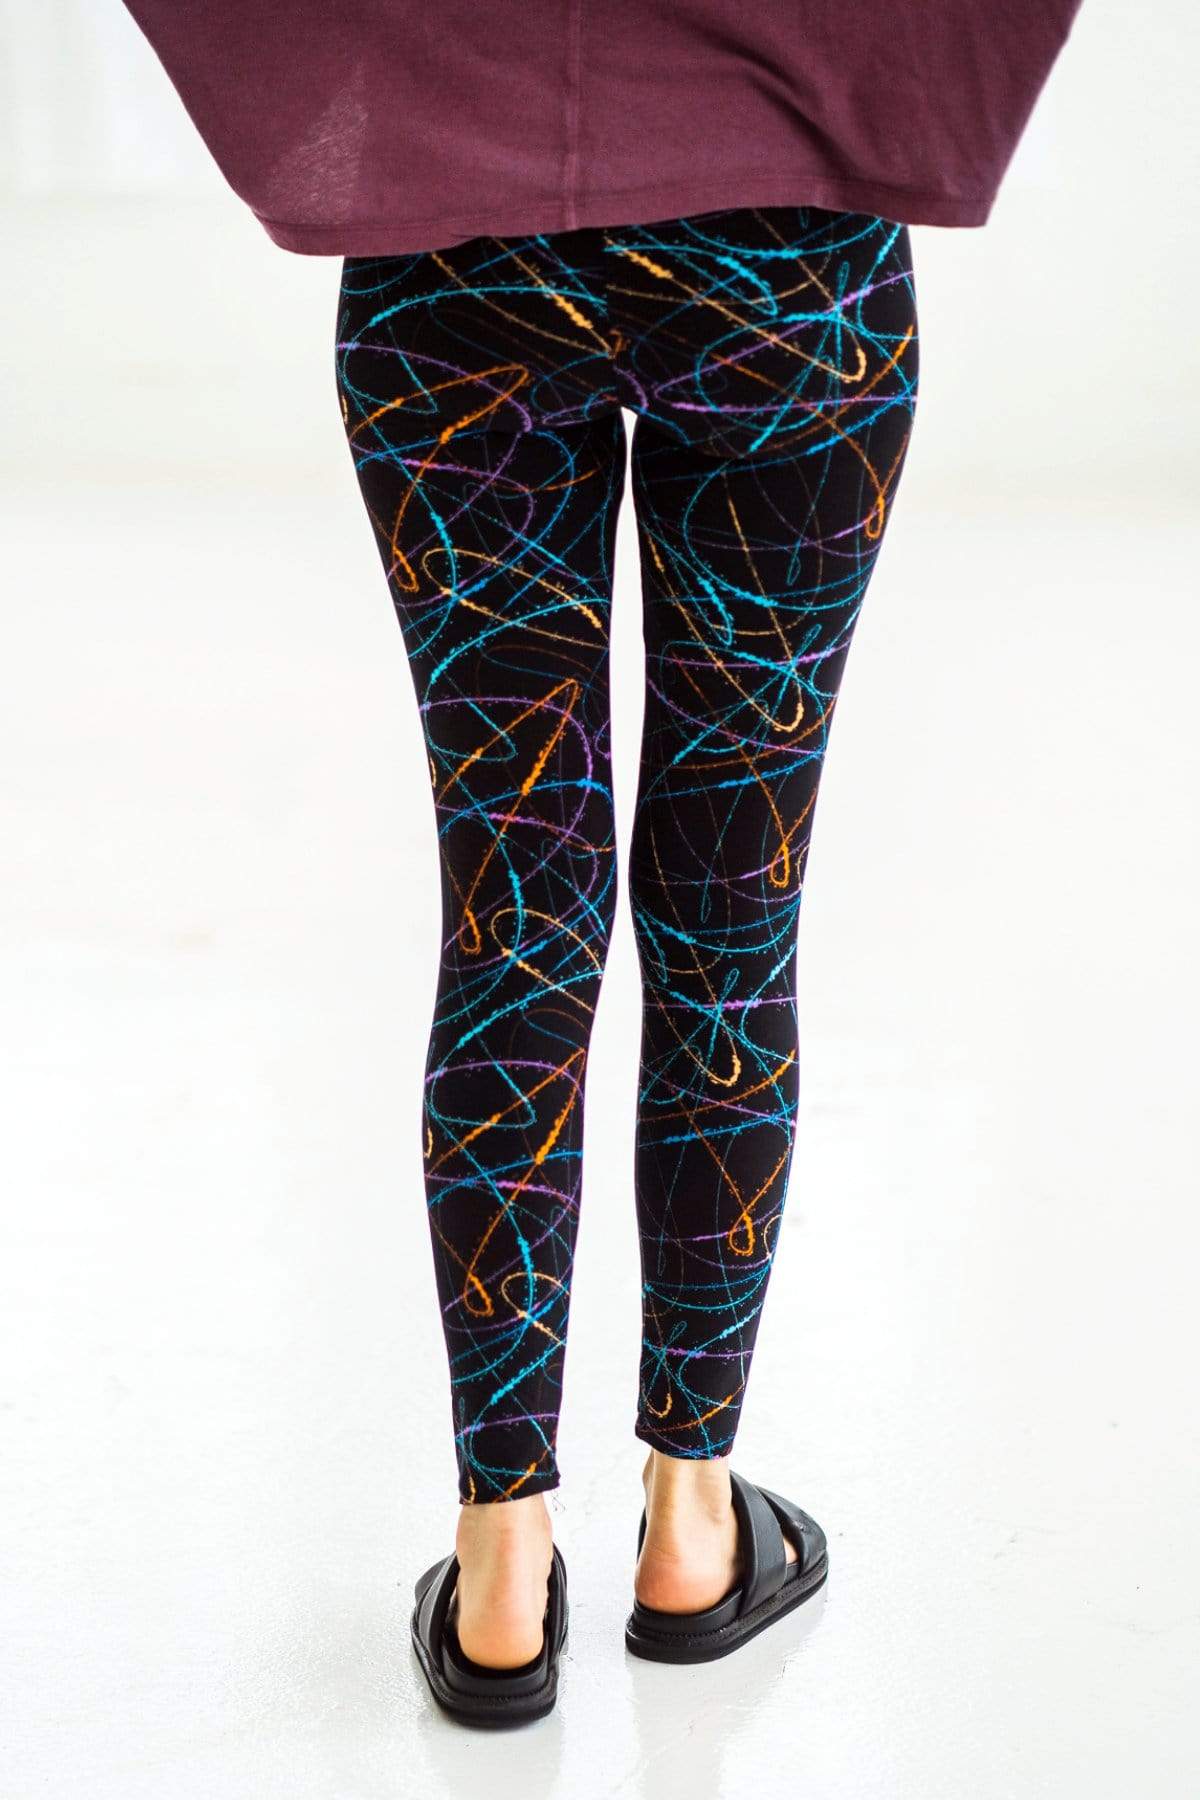 oolala Leggings Silly String Silly String - Soft, comfortable leggings. Beautiful designs and patterns. 